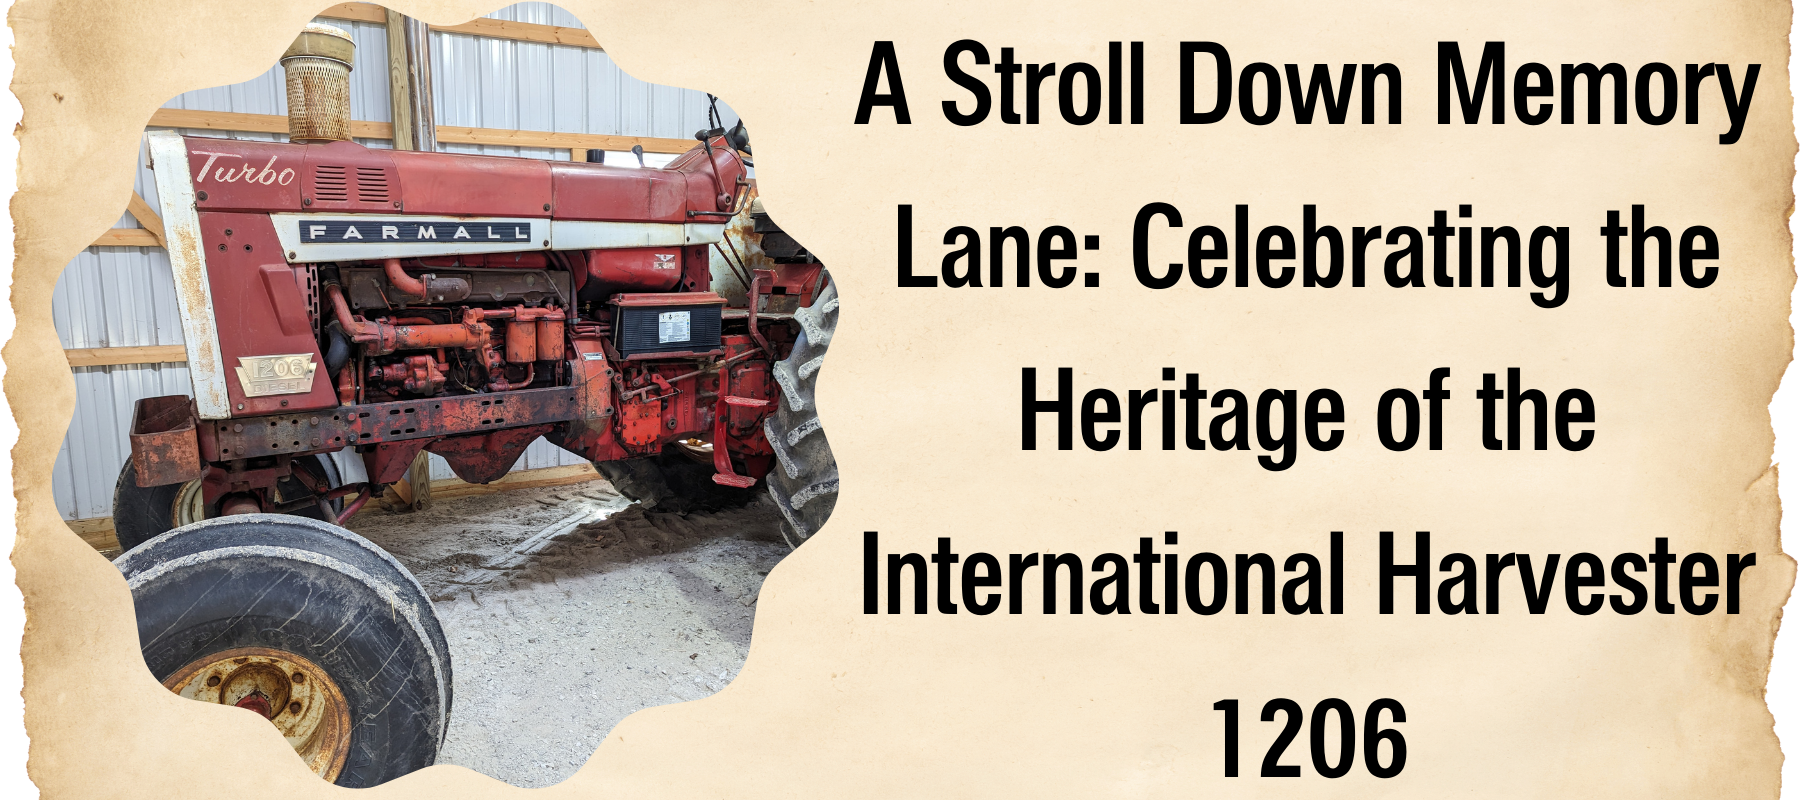 A Stroll Down Memory Lane: Celebrating the Heritage of the International Harvester 1206